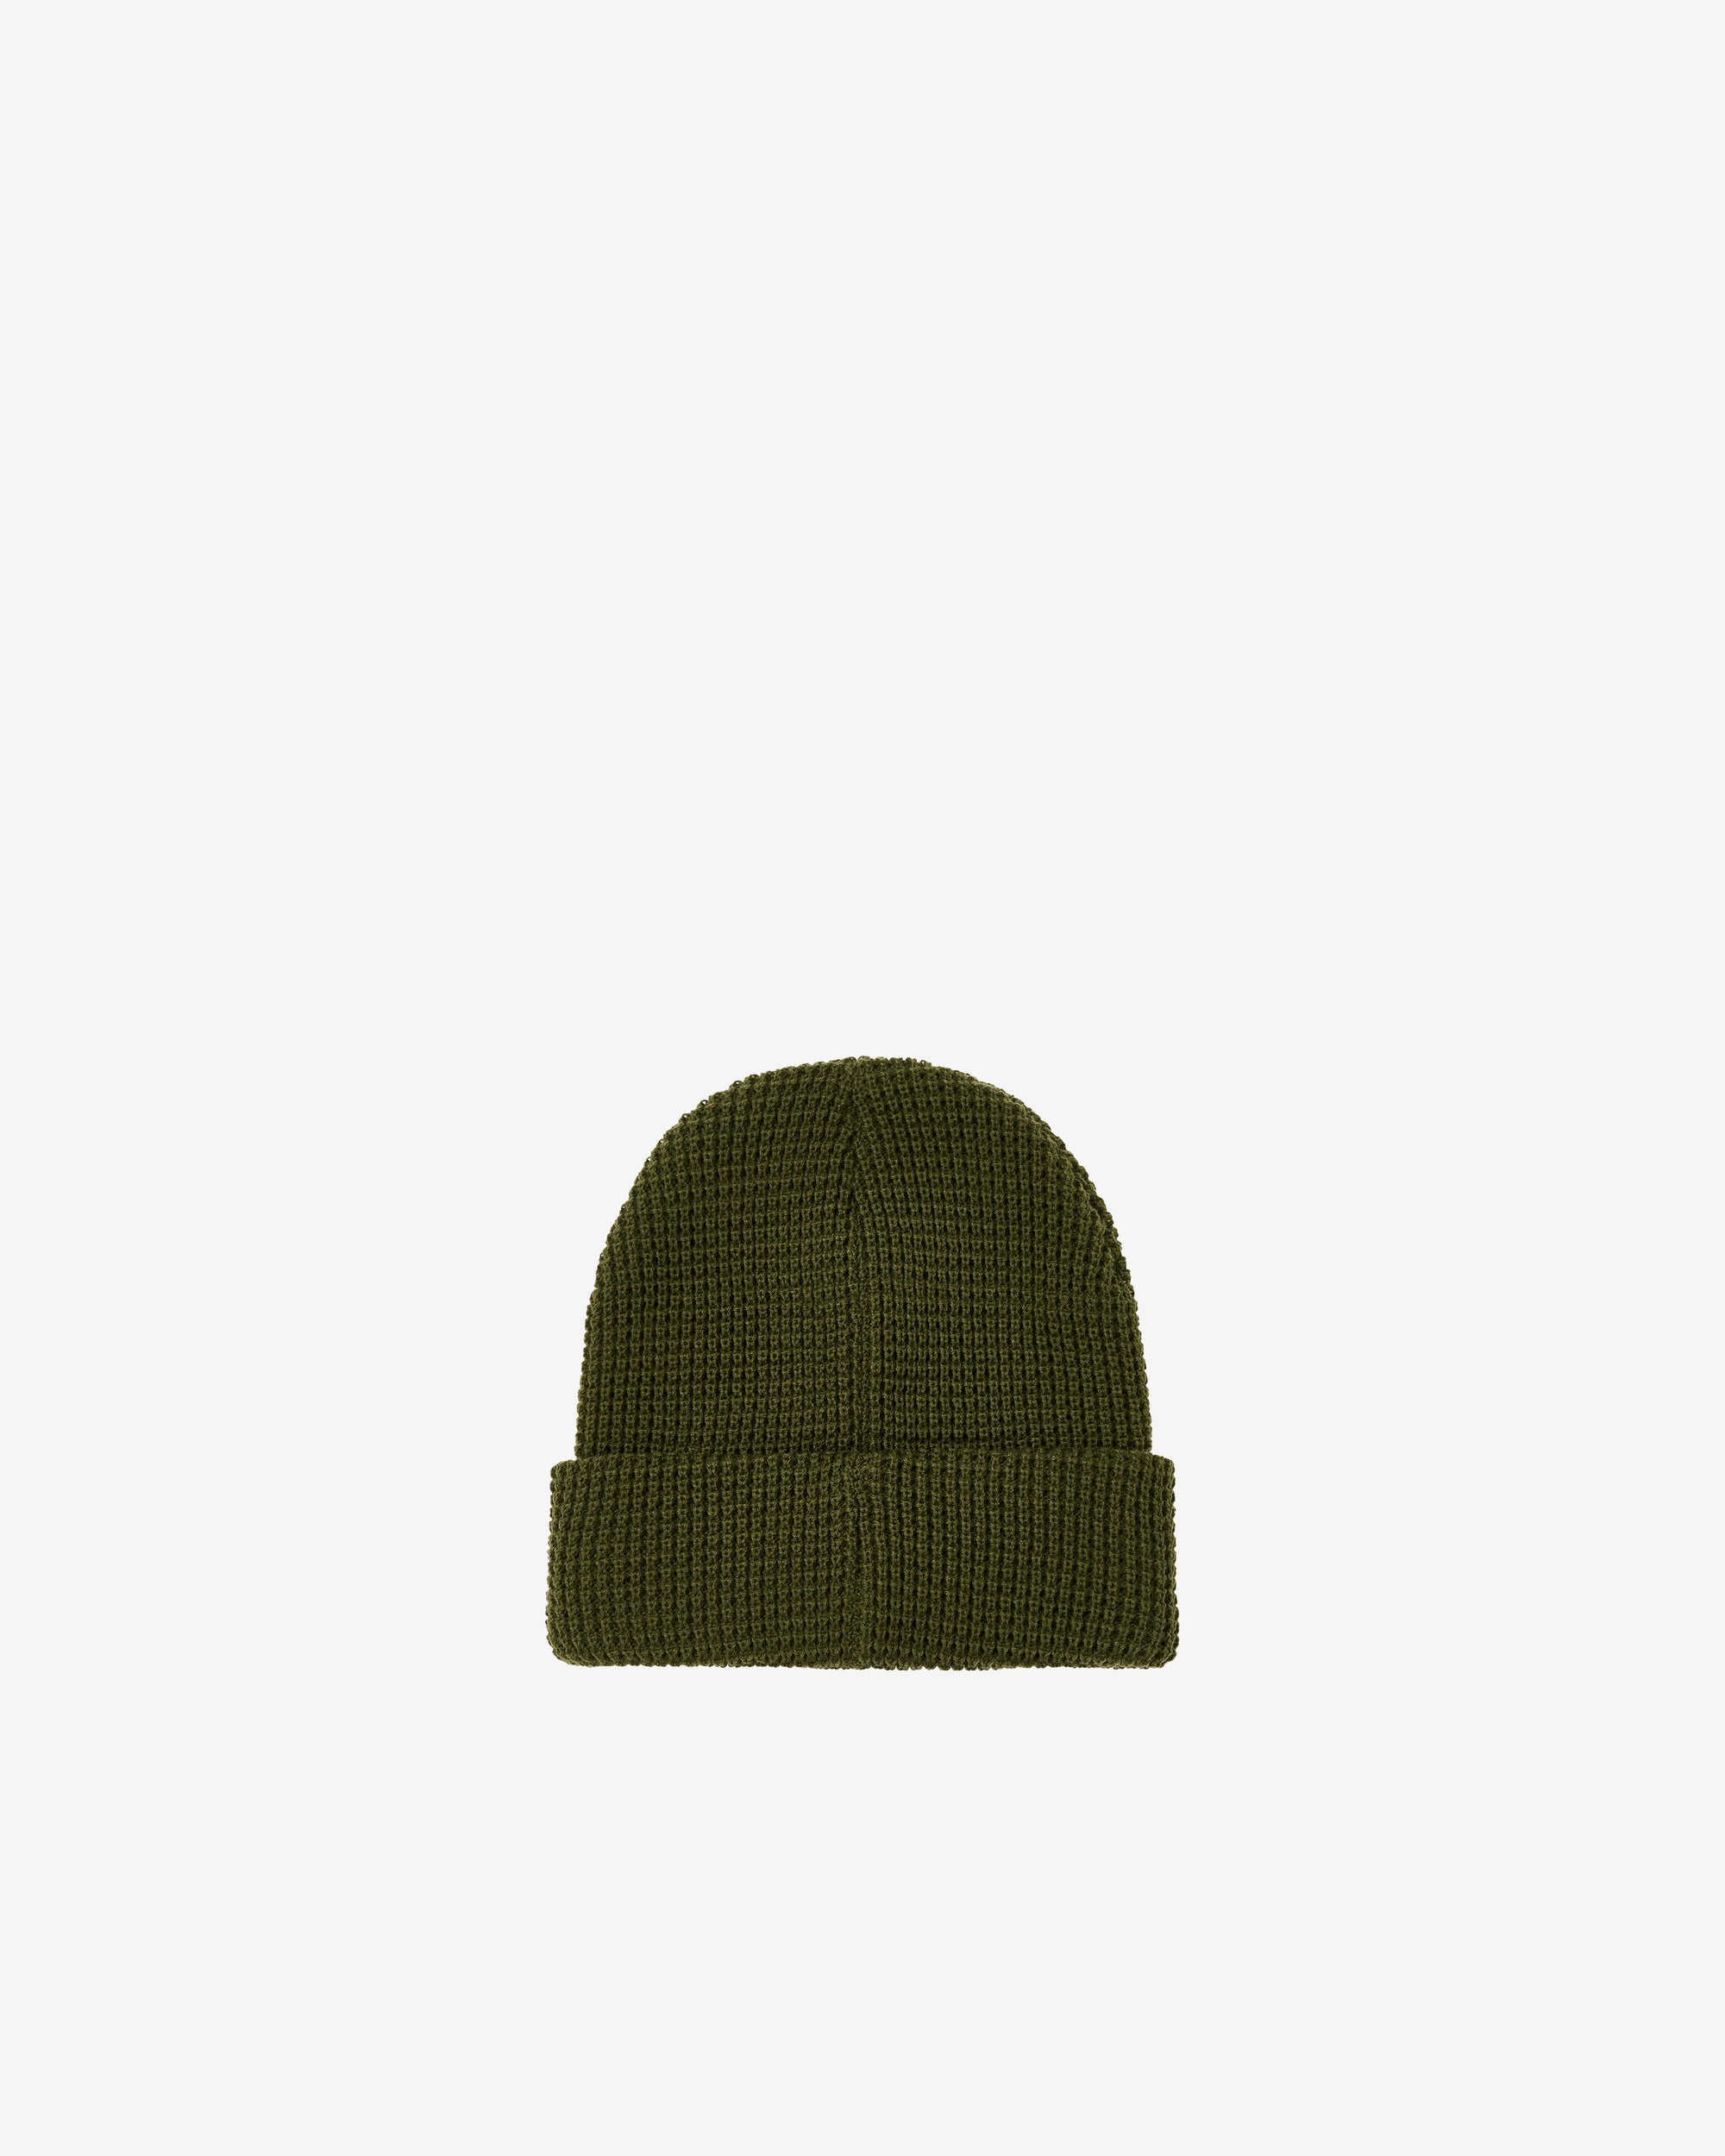 Palace - Men's Palace London Waffle Beanie - (The Deep Green) view 2